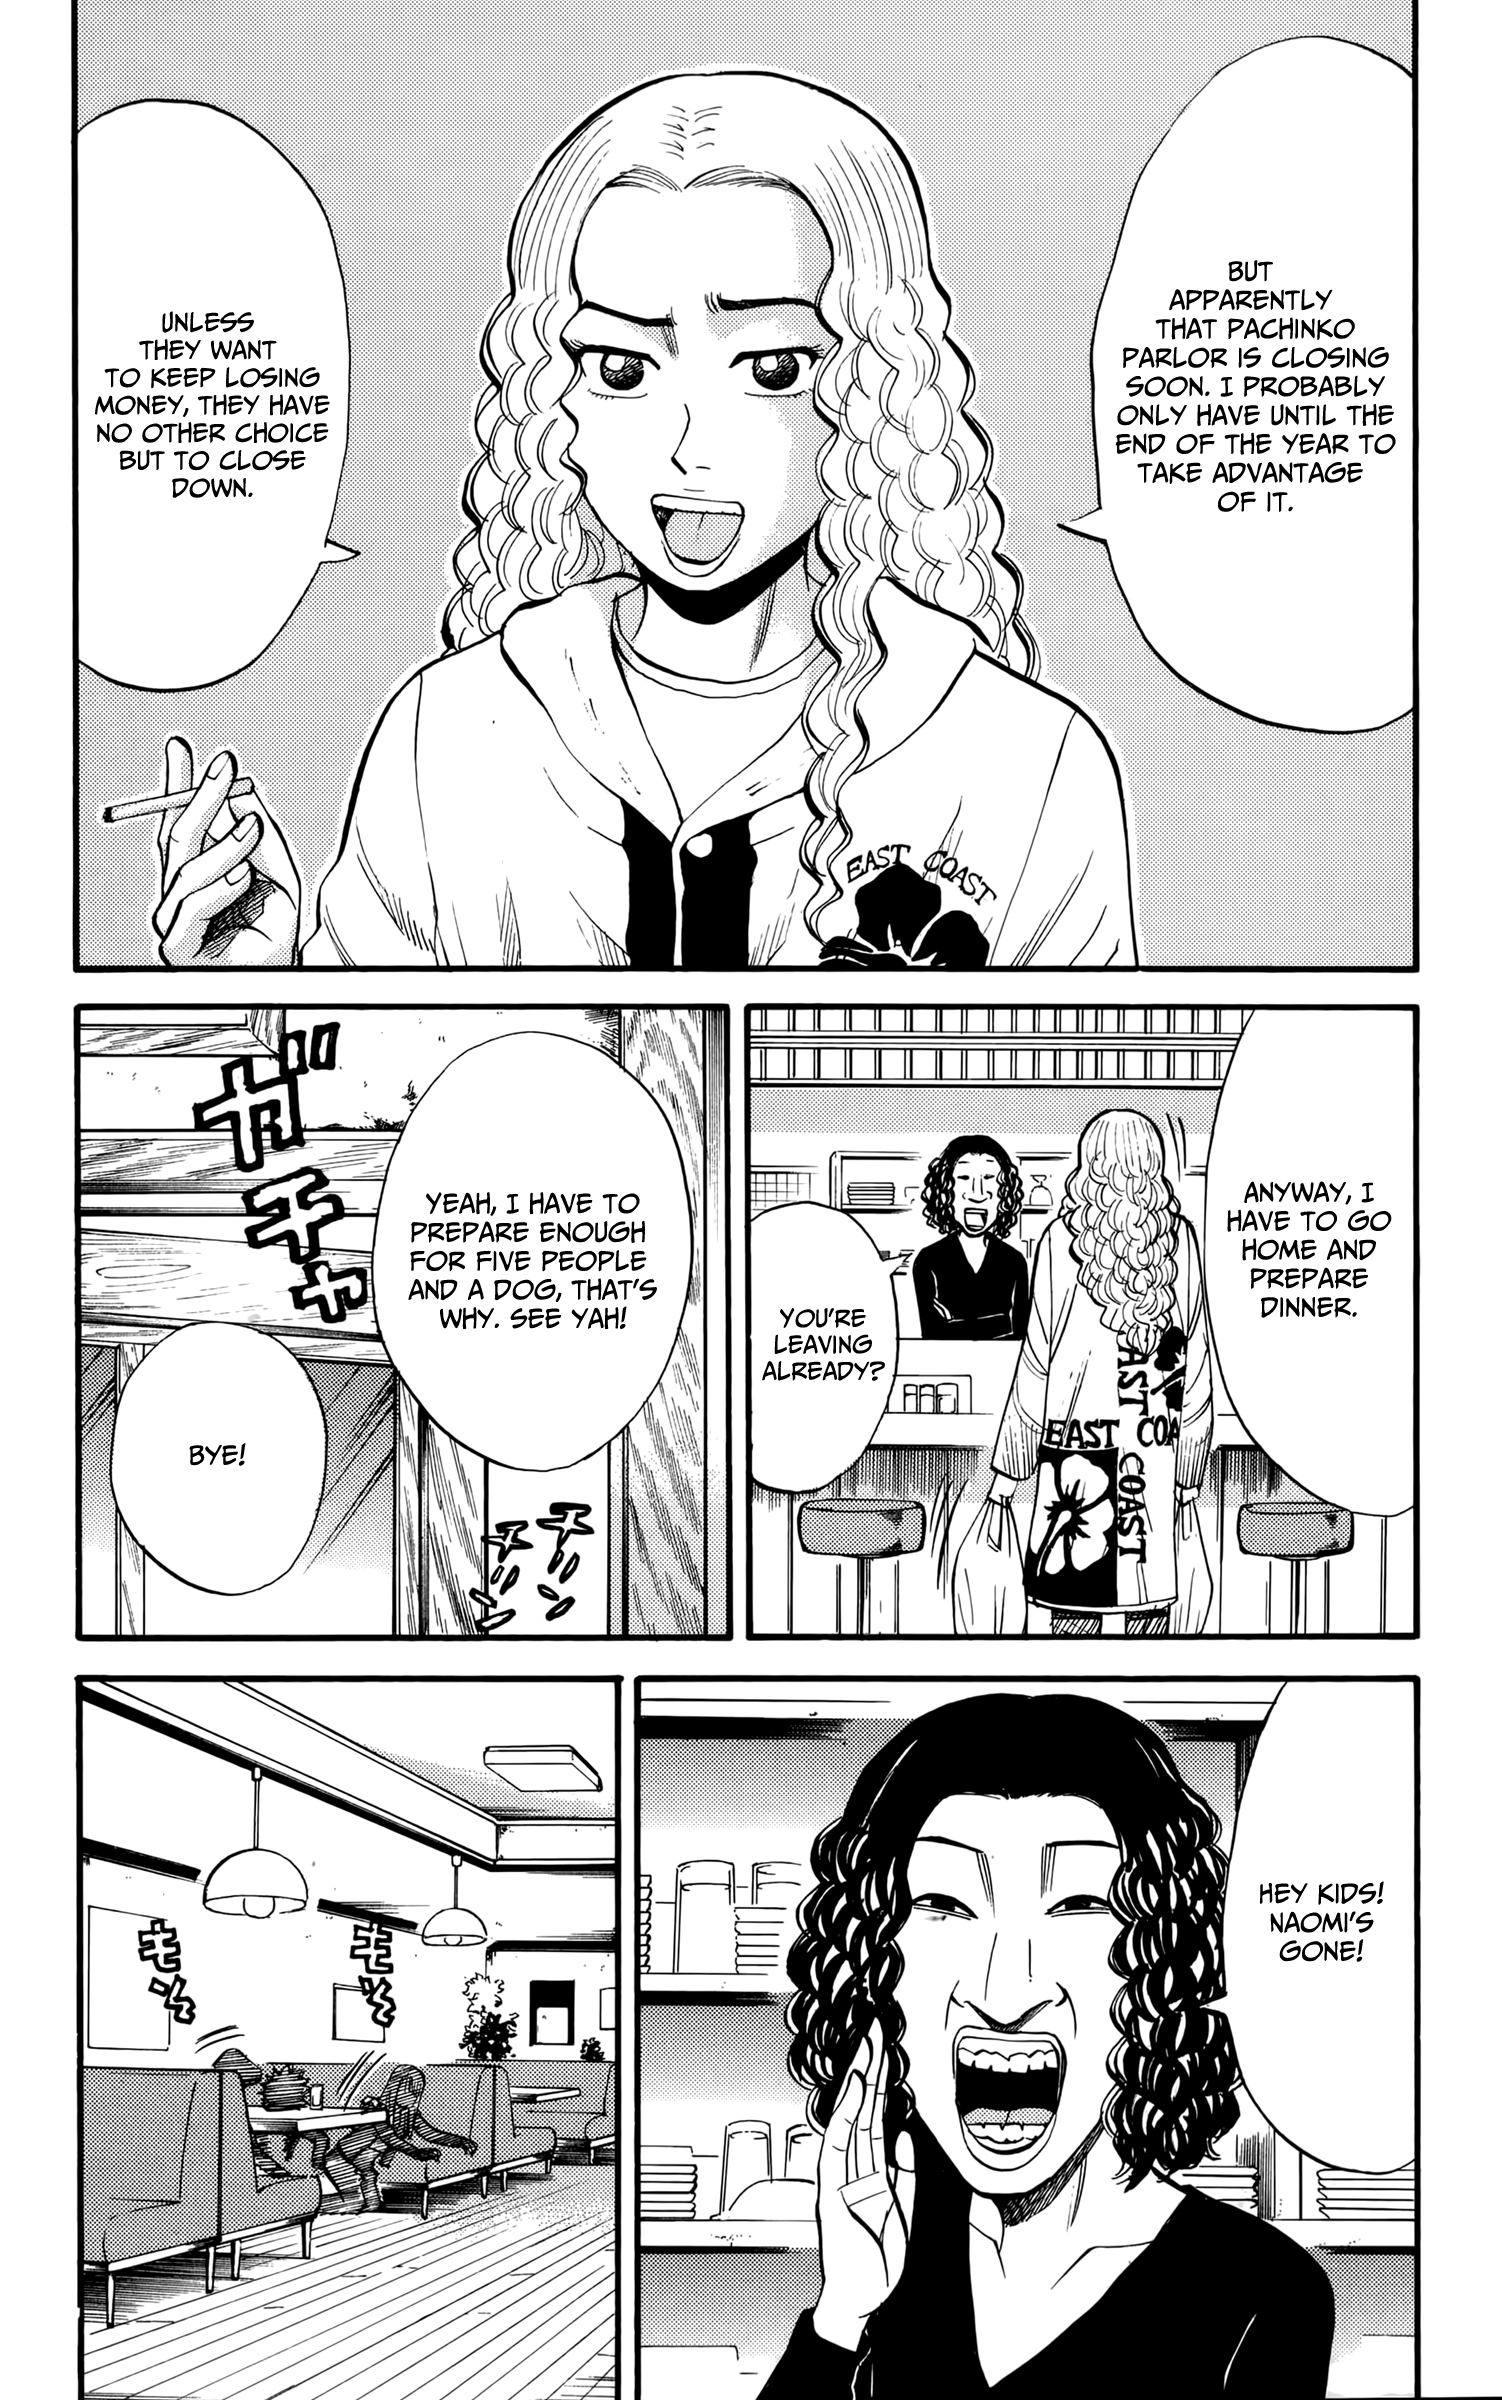 Nanba Mg5 Vol.10 Chapter 84: The Joys And Sorrows Of Christmas Eve - Picture 2